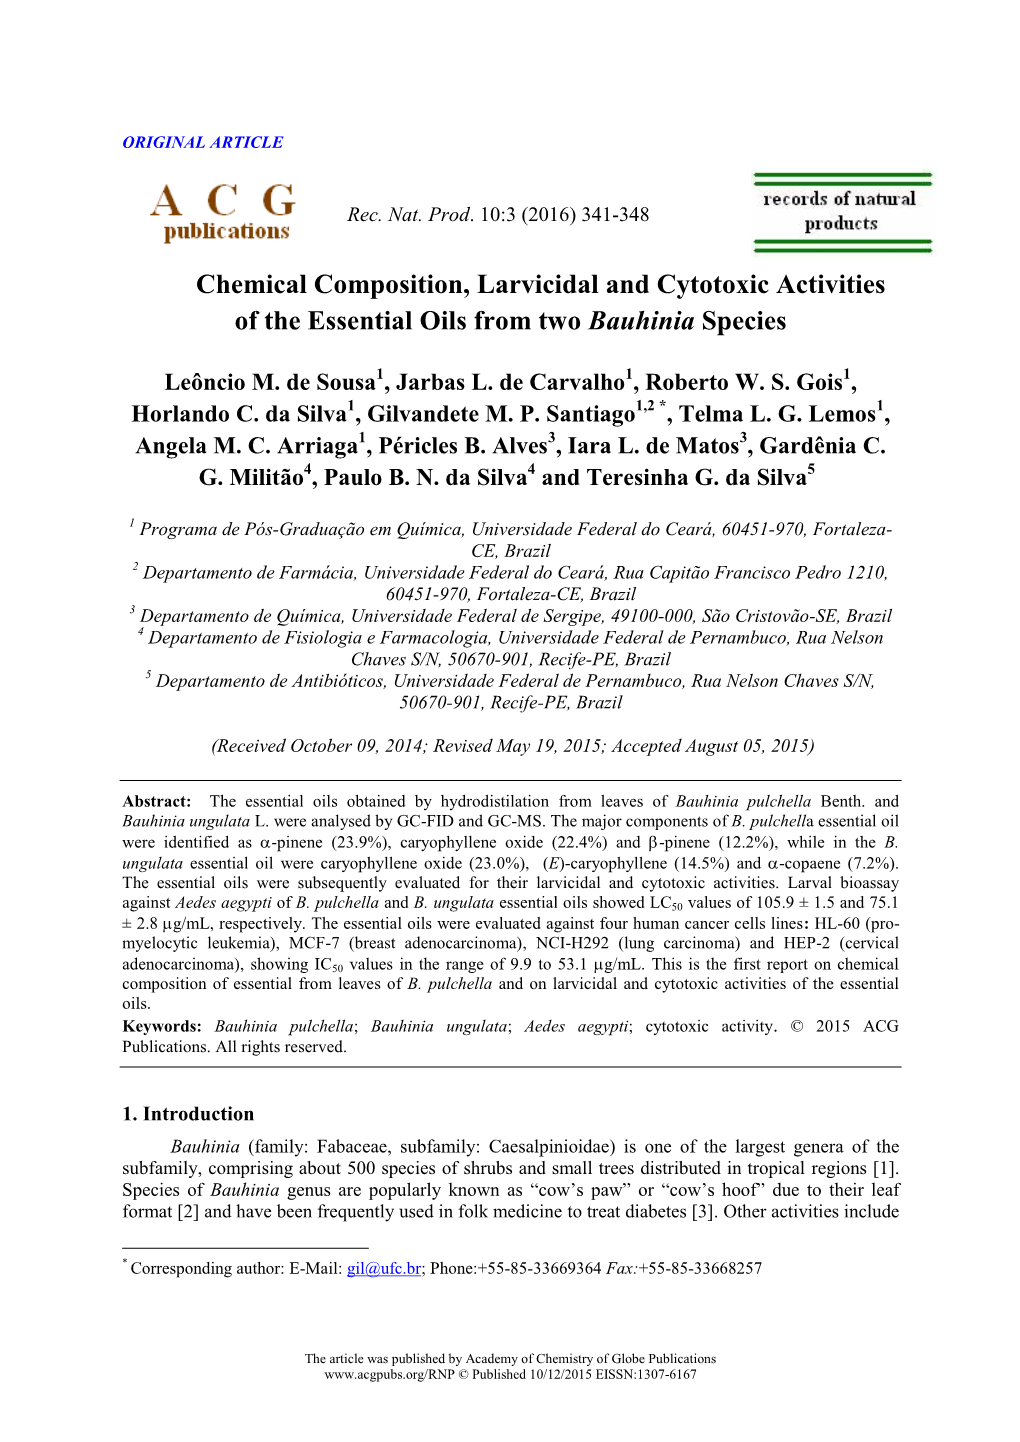 Chemical Composition, Larvicidal and Cytotoxic Activities of the Essential Oils from Two Bauhinia Species